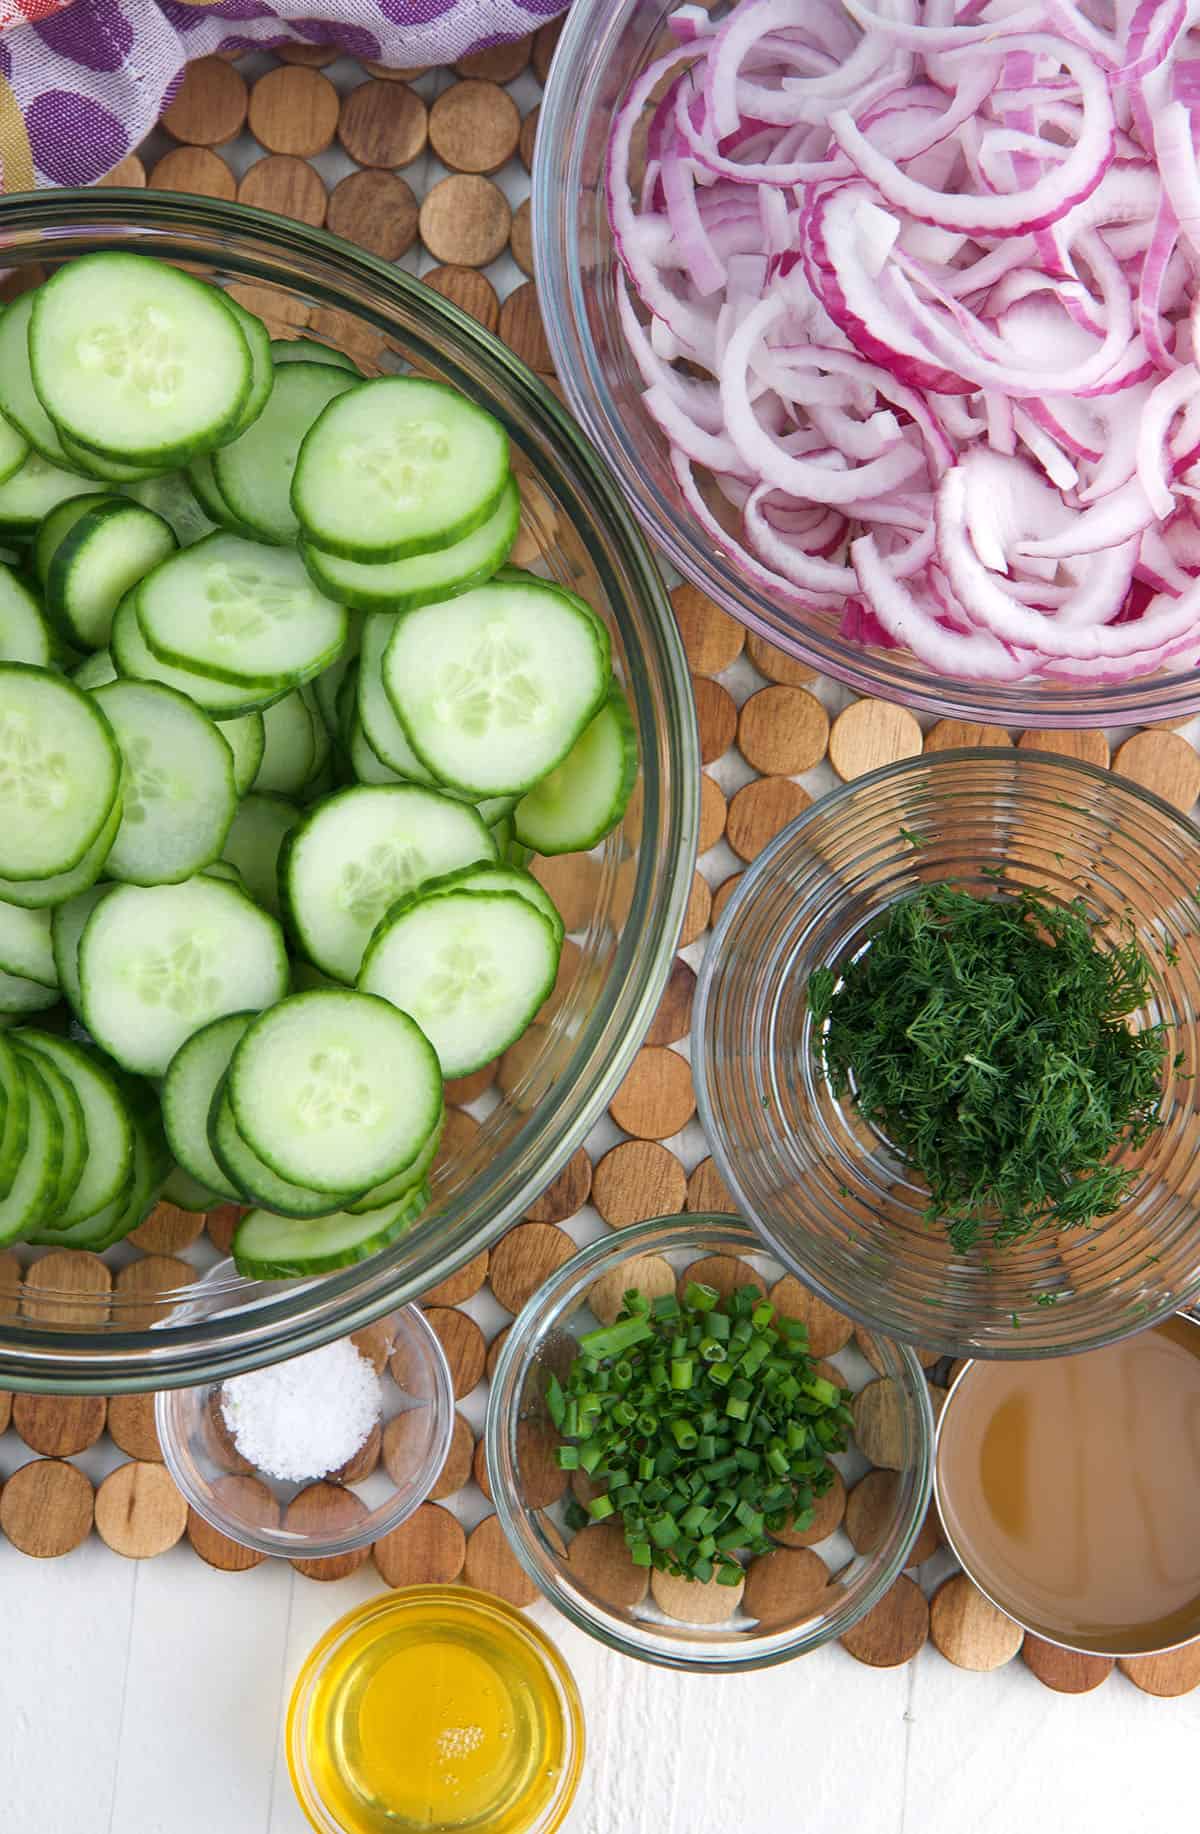 The ingredients for cucumber onion salad are spread out. 